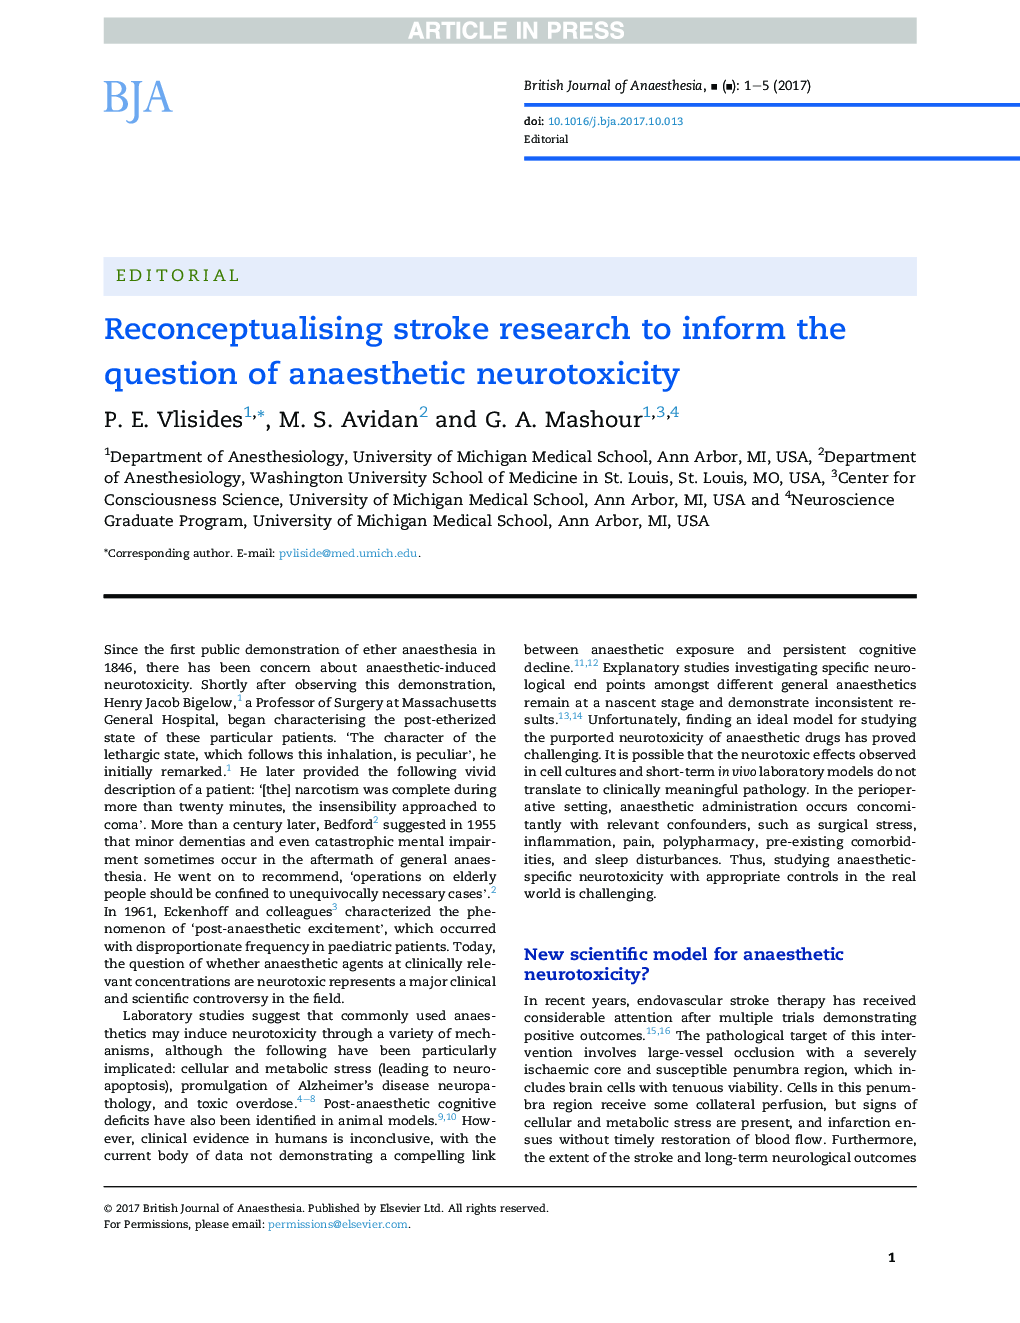 Reconceptualising stroke research to inform the question of anaesthetic neurotoxicity